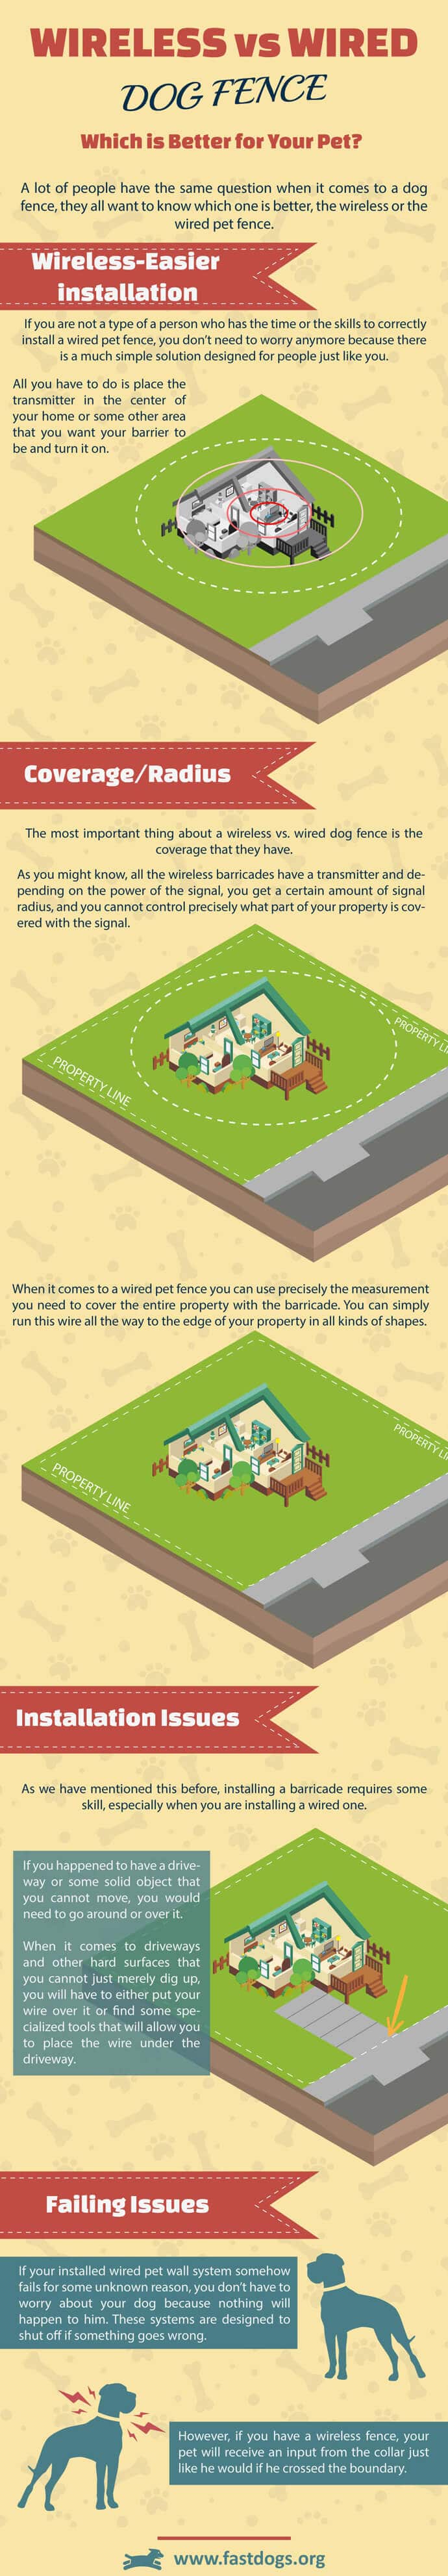 Wireless vs. Wired Dog Fence-Infographic